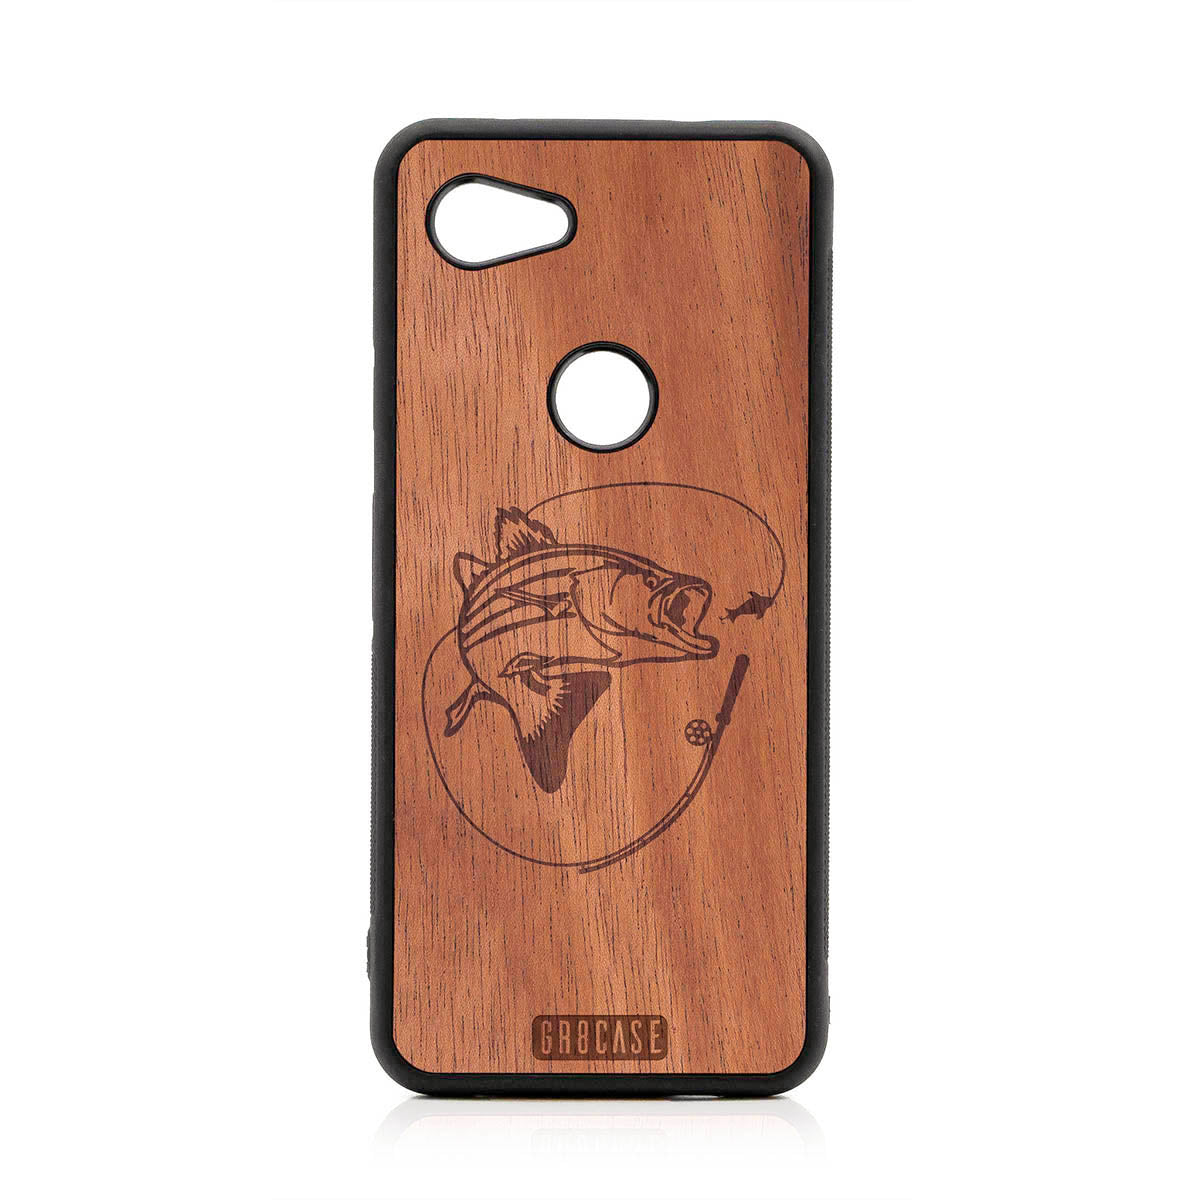 Fish and Reel Design Wood Case For Google Pixel 3A XL by GR8CASE